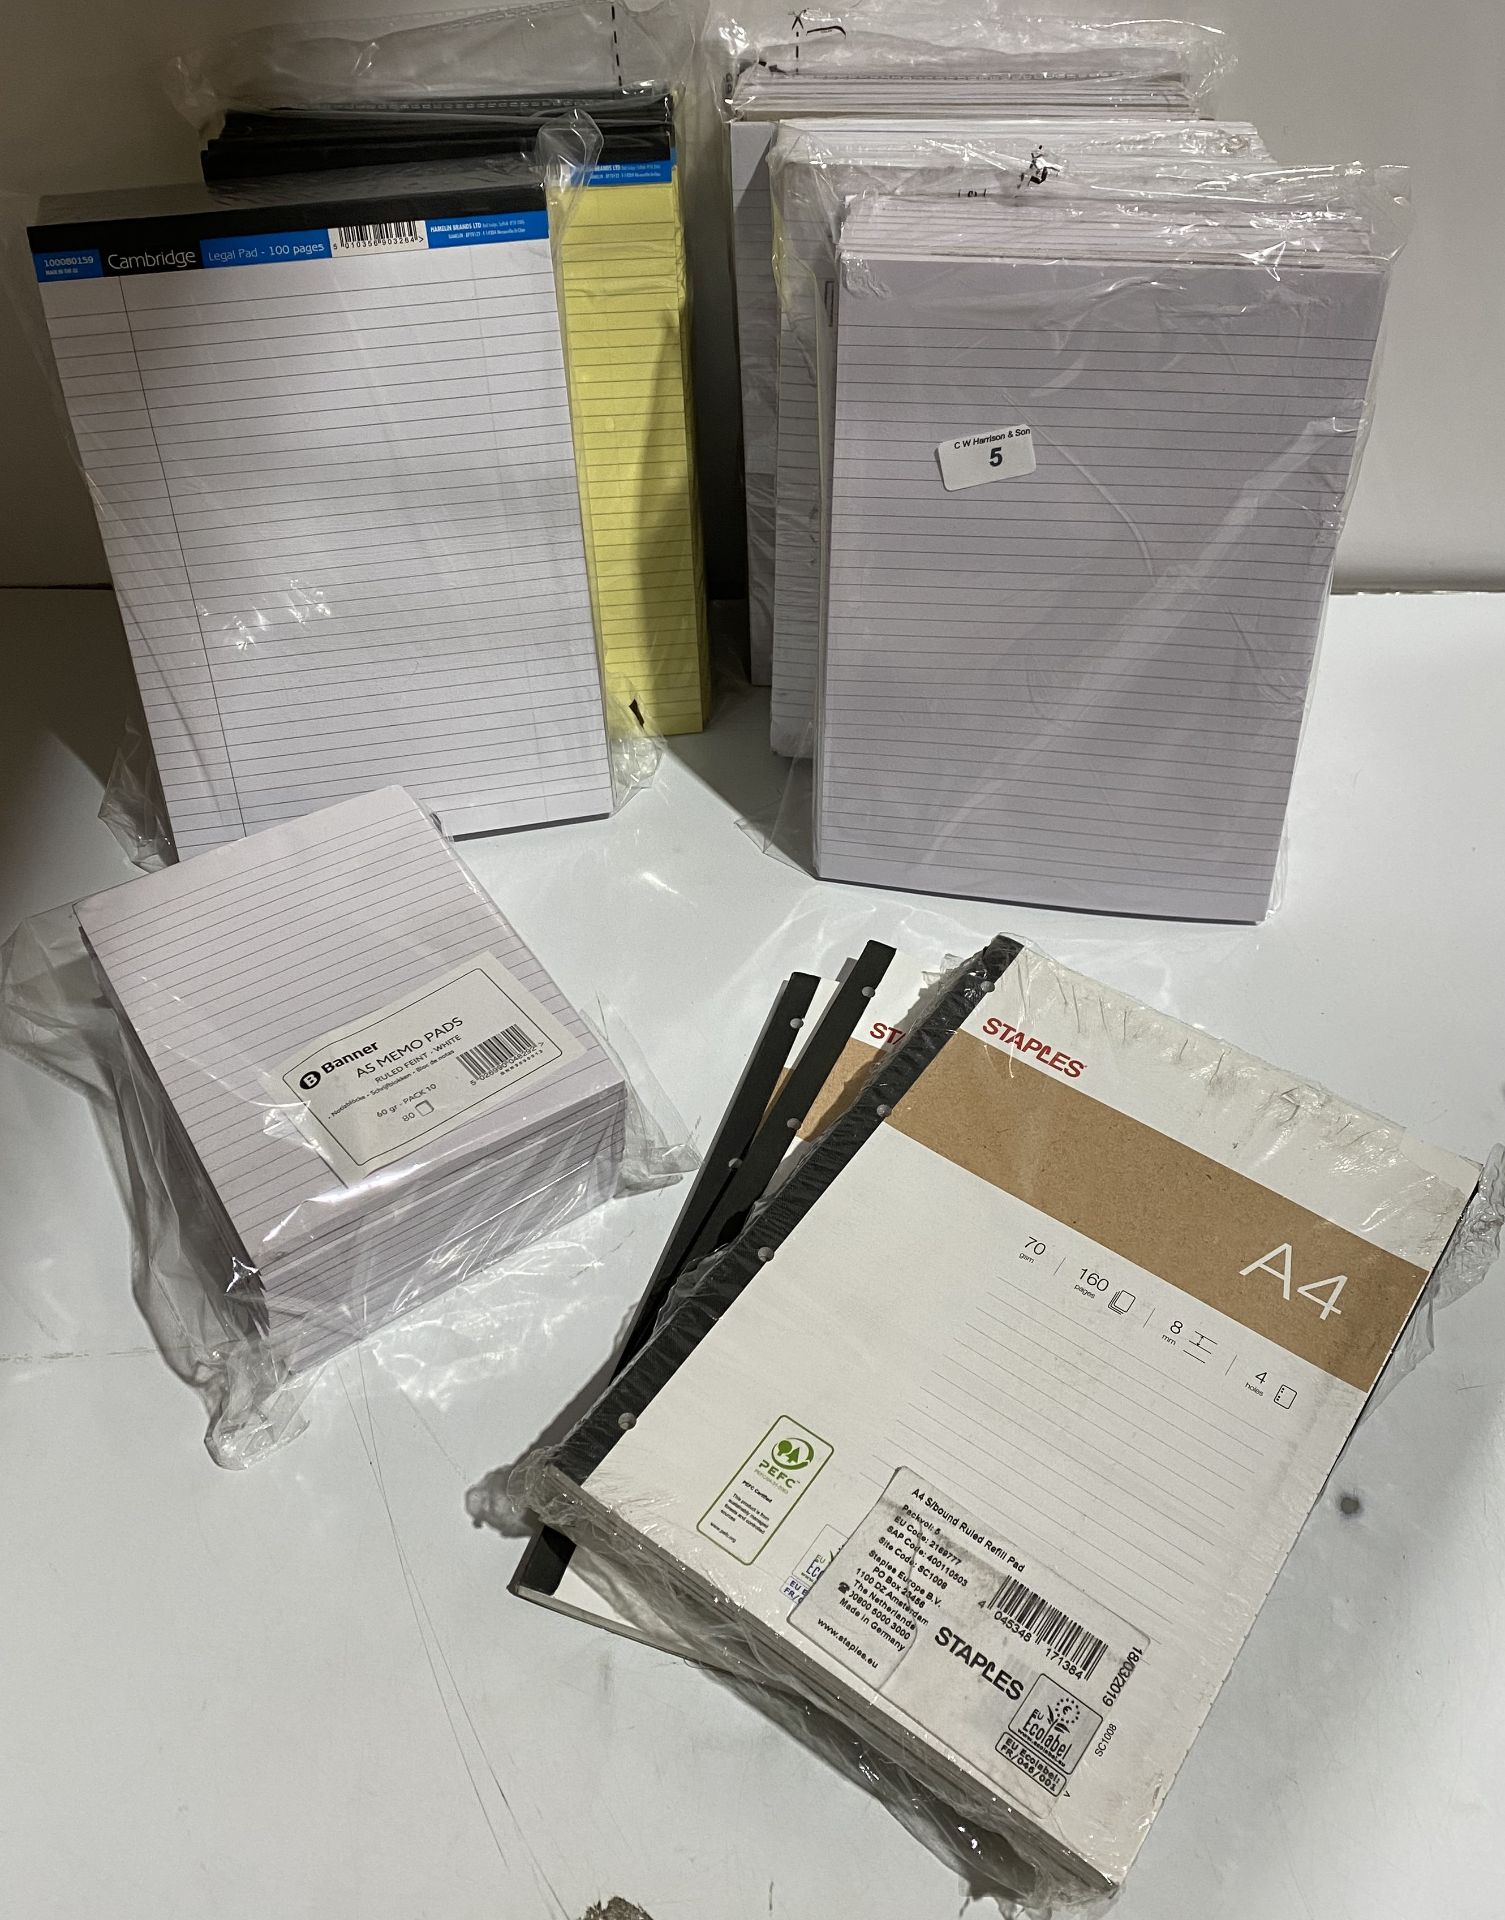 10 x A4 yellow Cambridge legal refill pad 100 page each, 30 x A4 memo 80 page refill pad ruled,